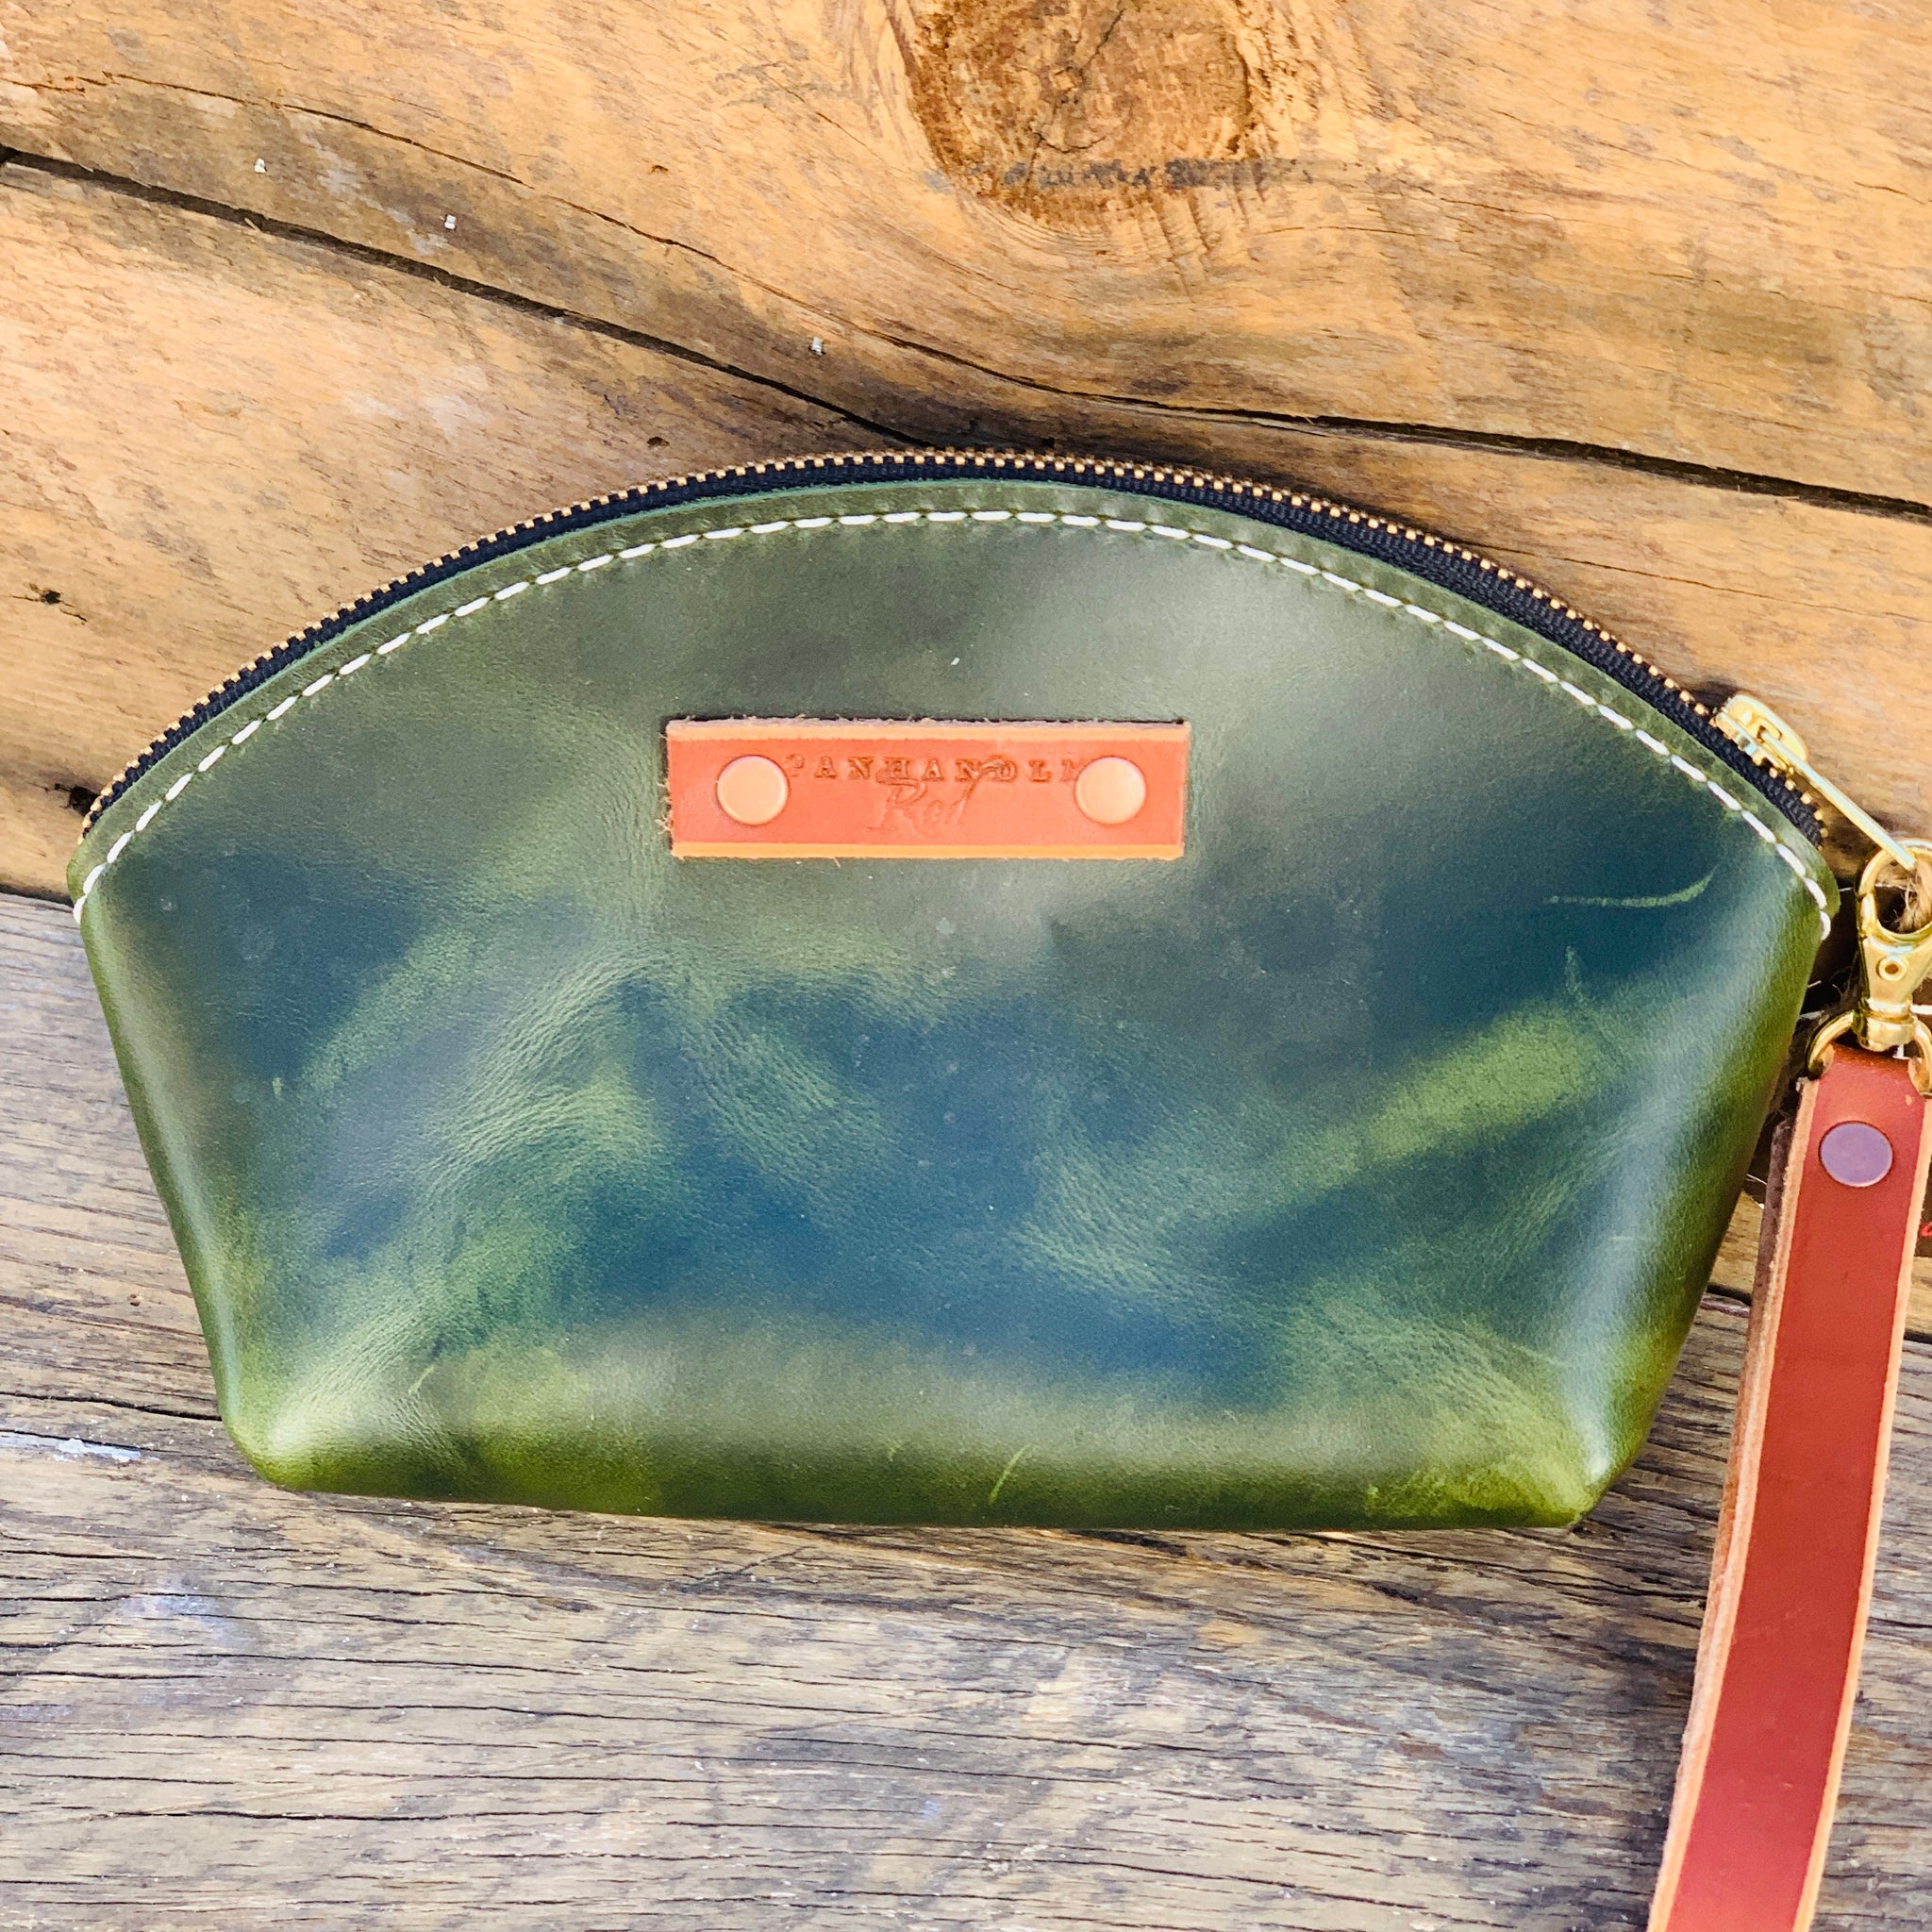 Brown Leather Purse by Panhandle Red Leather Company, North Idaho Gift Shop